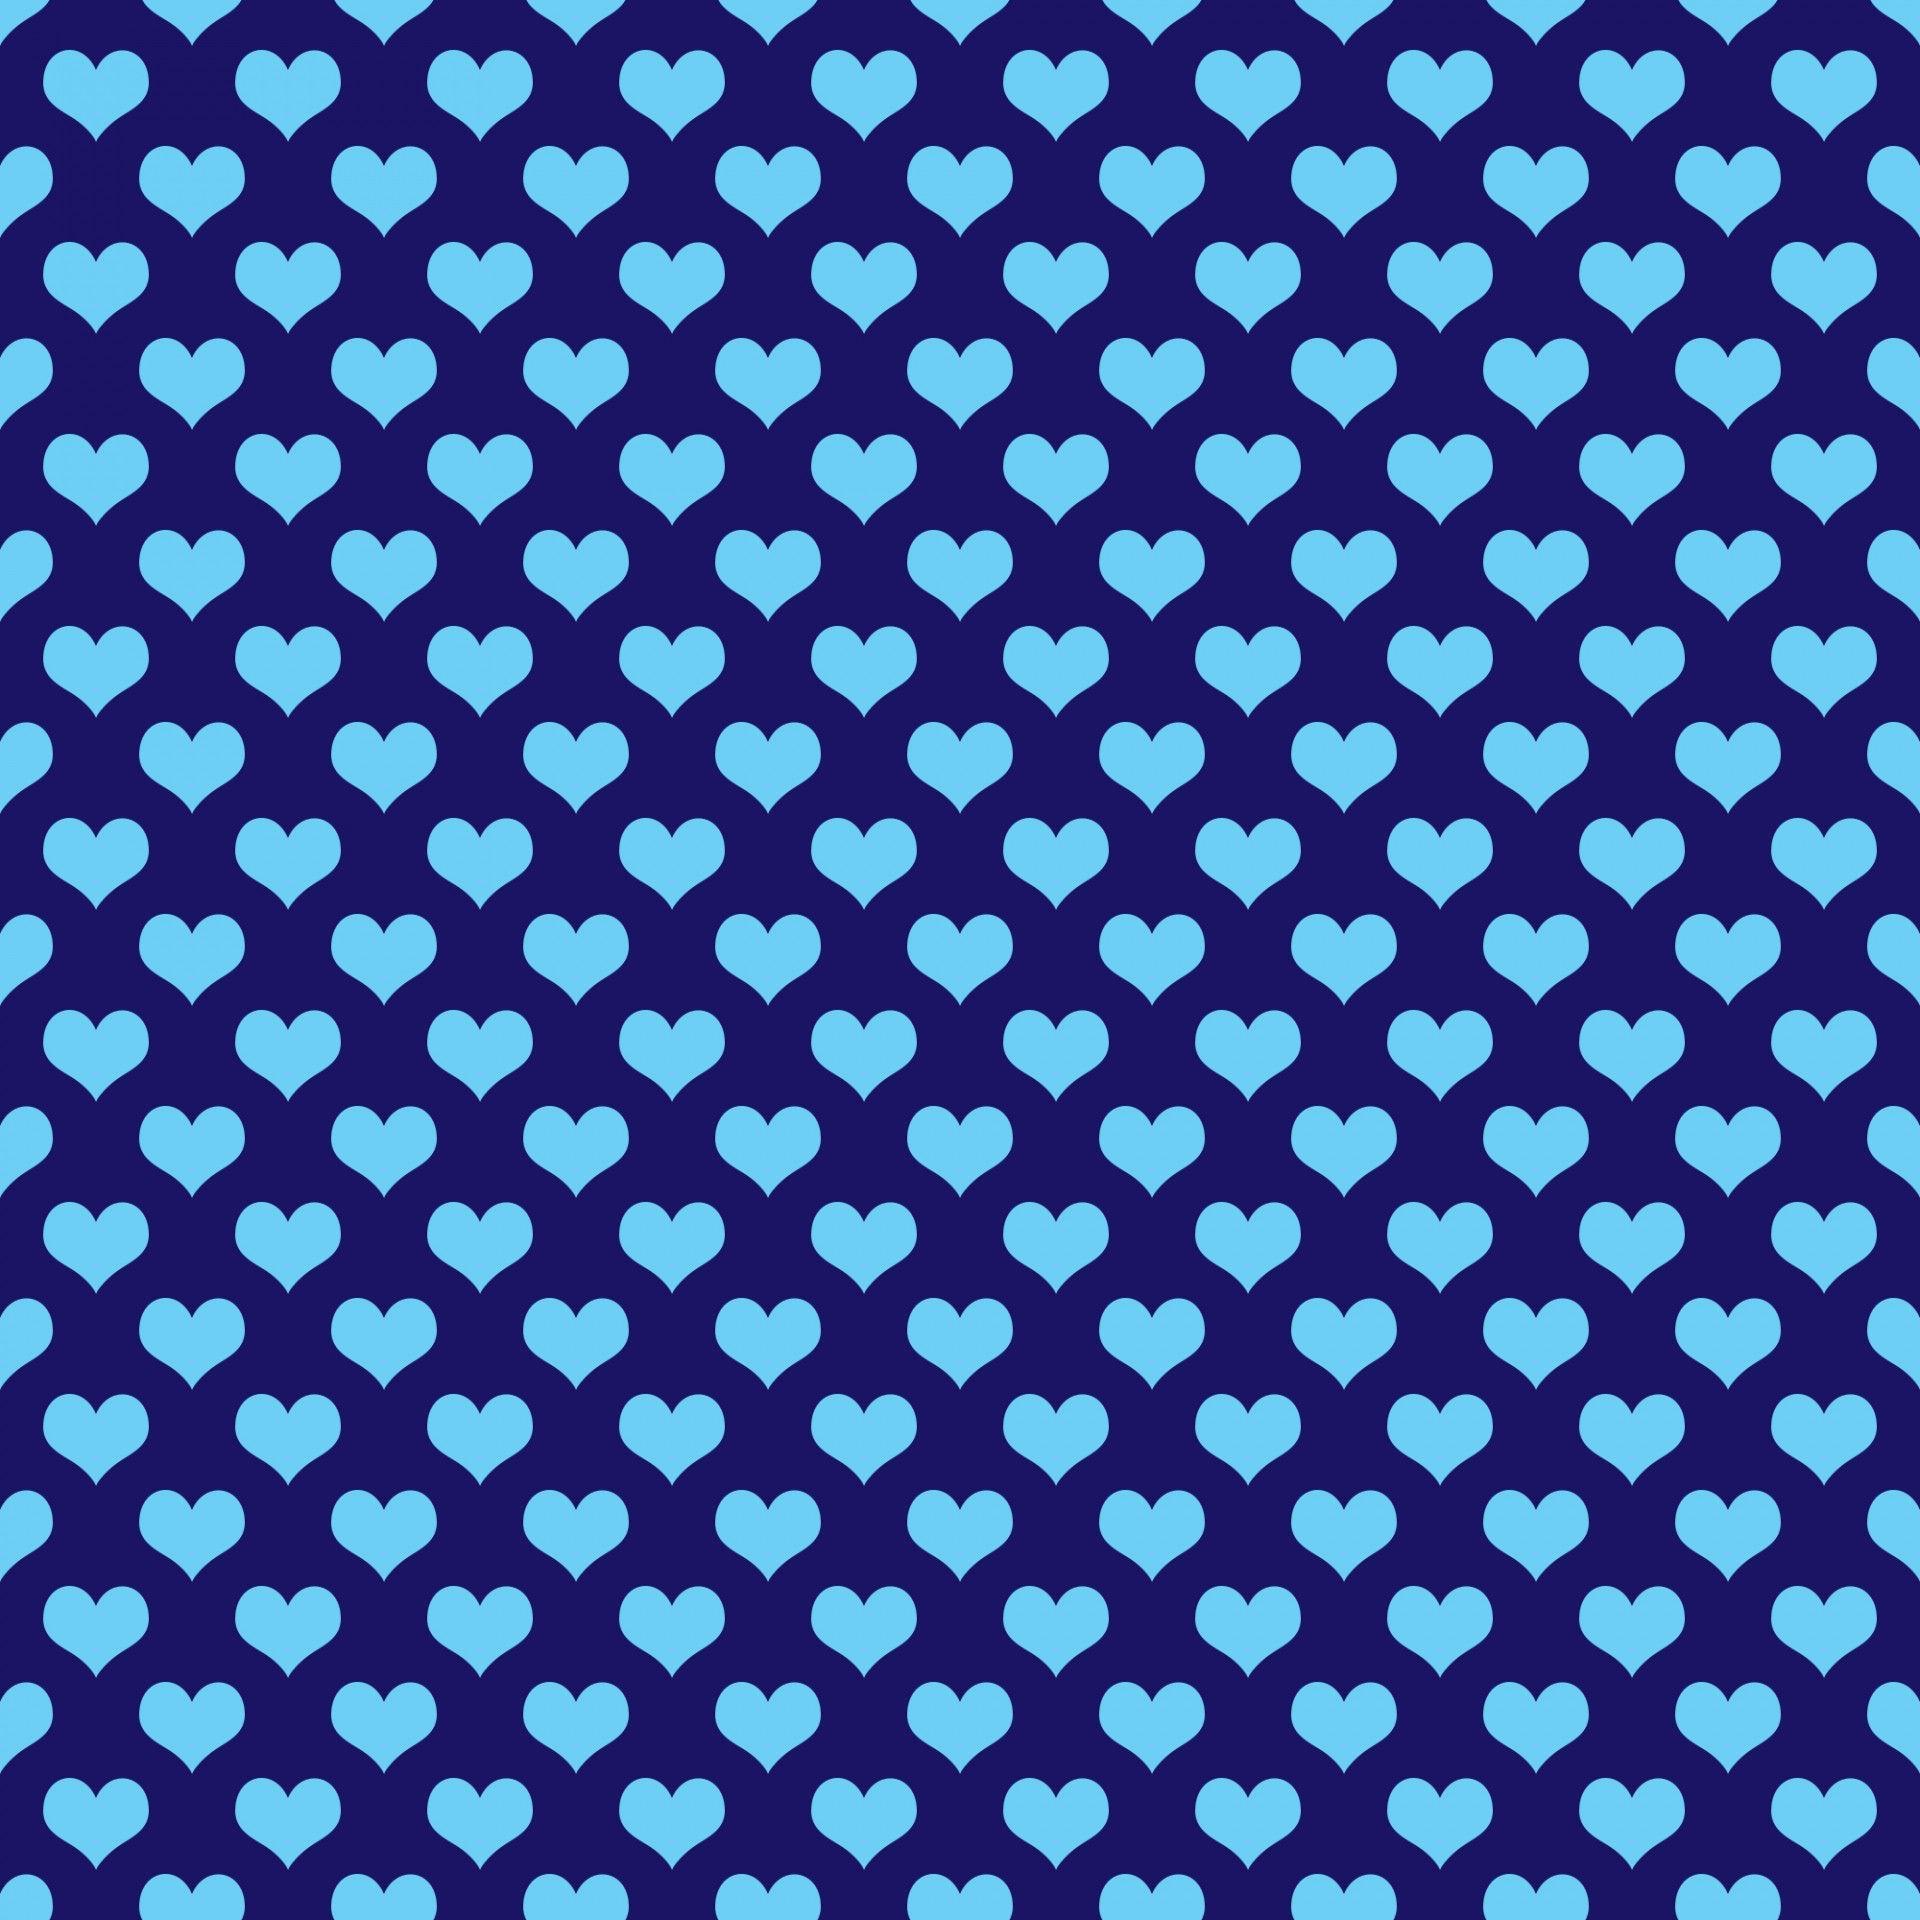 Hearts Background Wallpaper Blue Free Domain